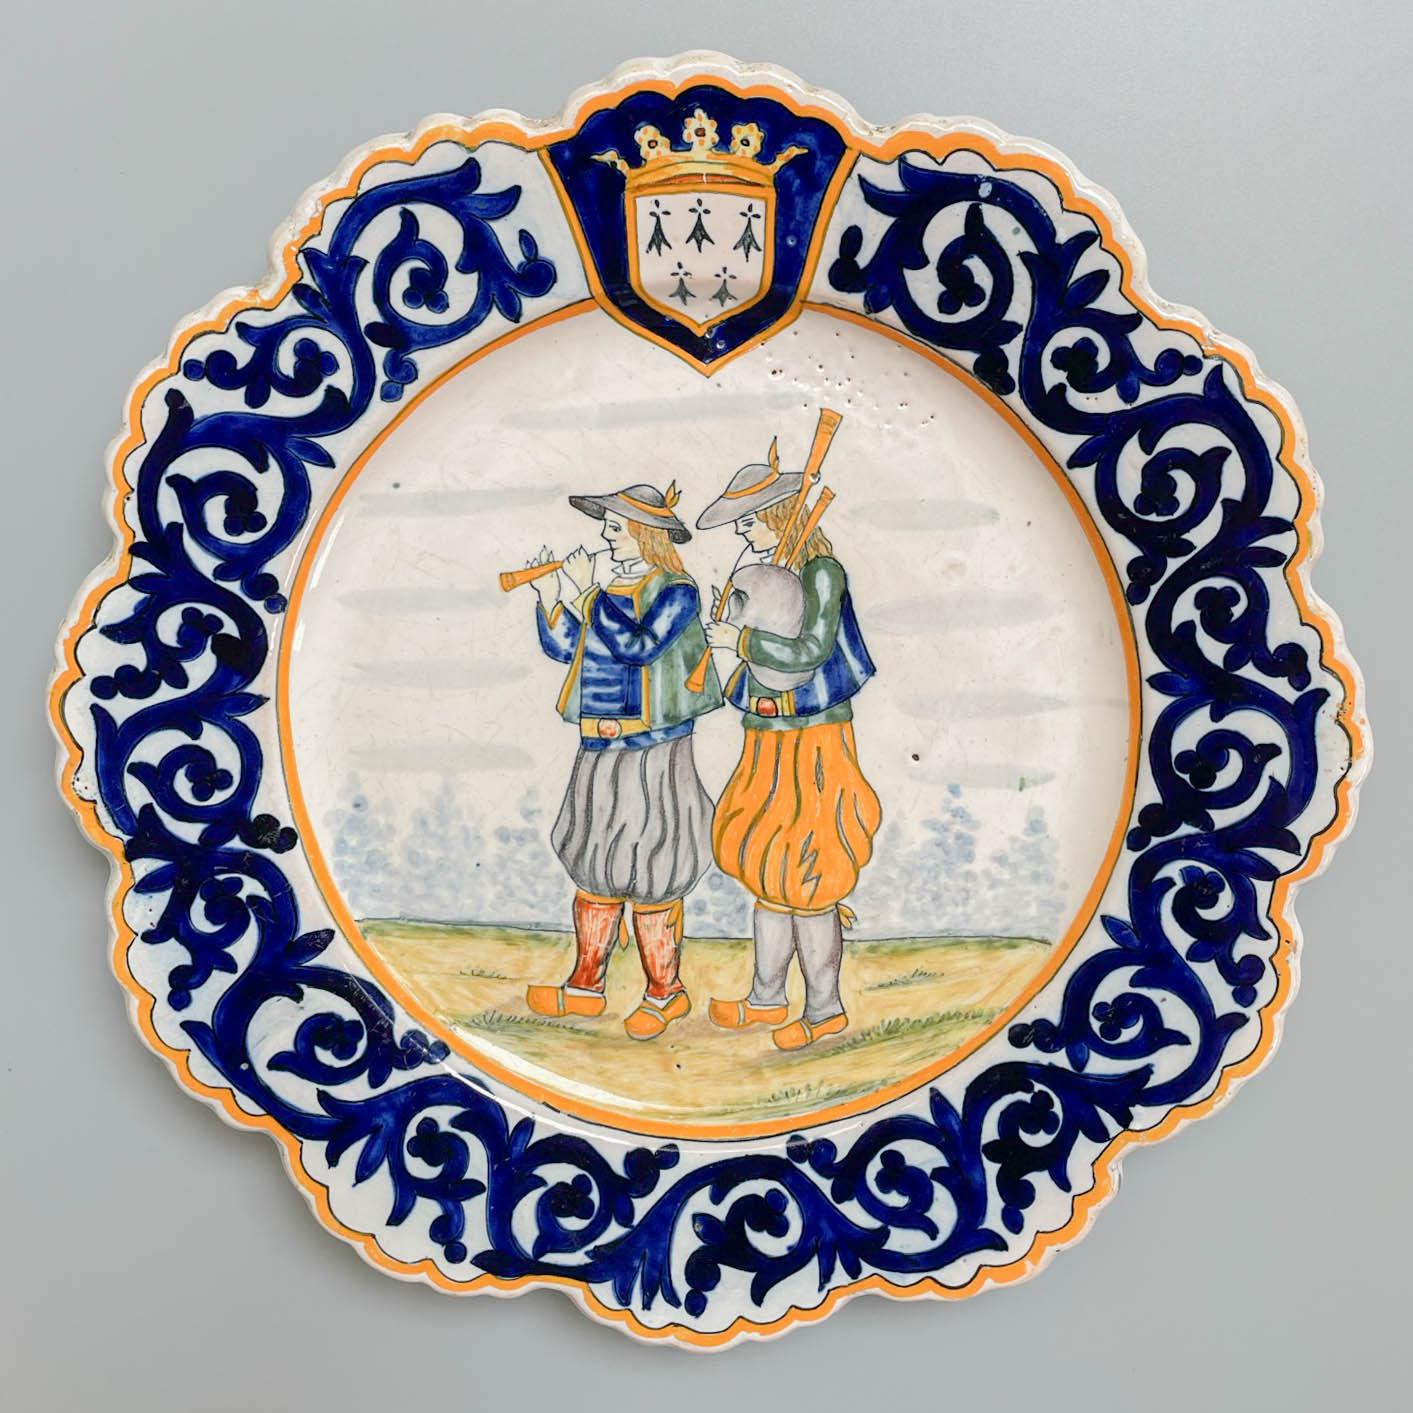 A Henriot Quimper French faience hand painted decorative plate, depicting a a pair of musicians, one with a pipe and one with a traditional binioù, or bagpipe.. Blue foliate border with Brittany crest at the top. A good quality, thick plate with